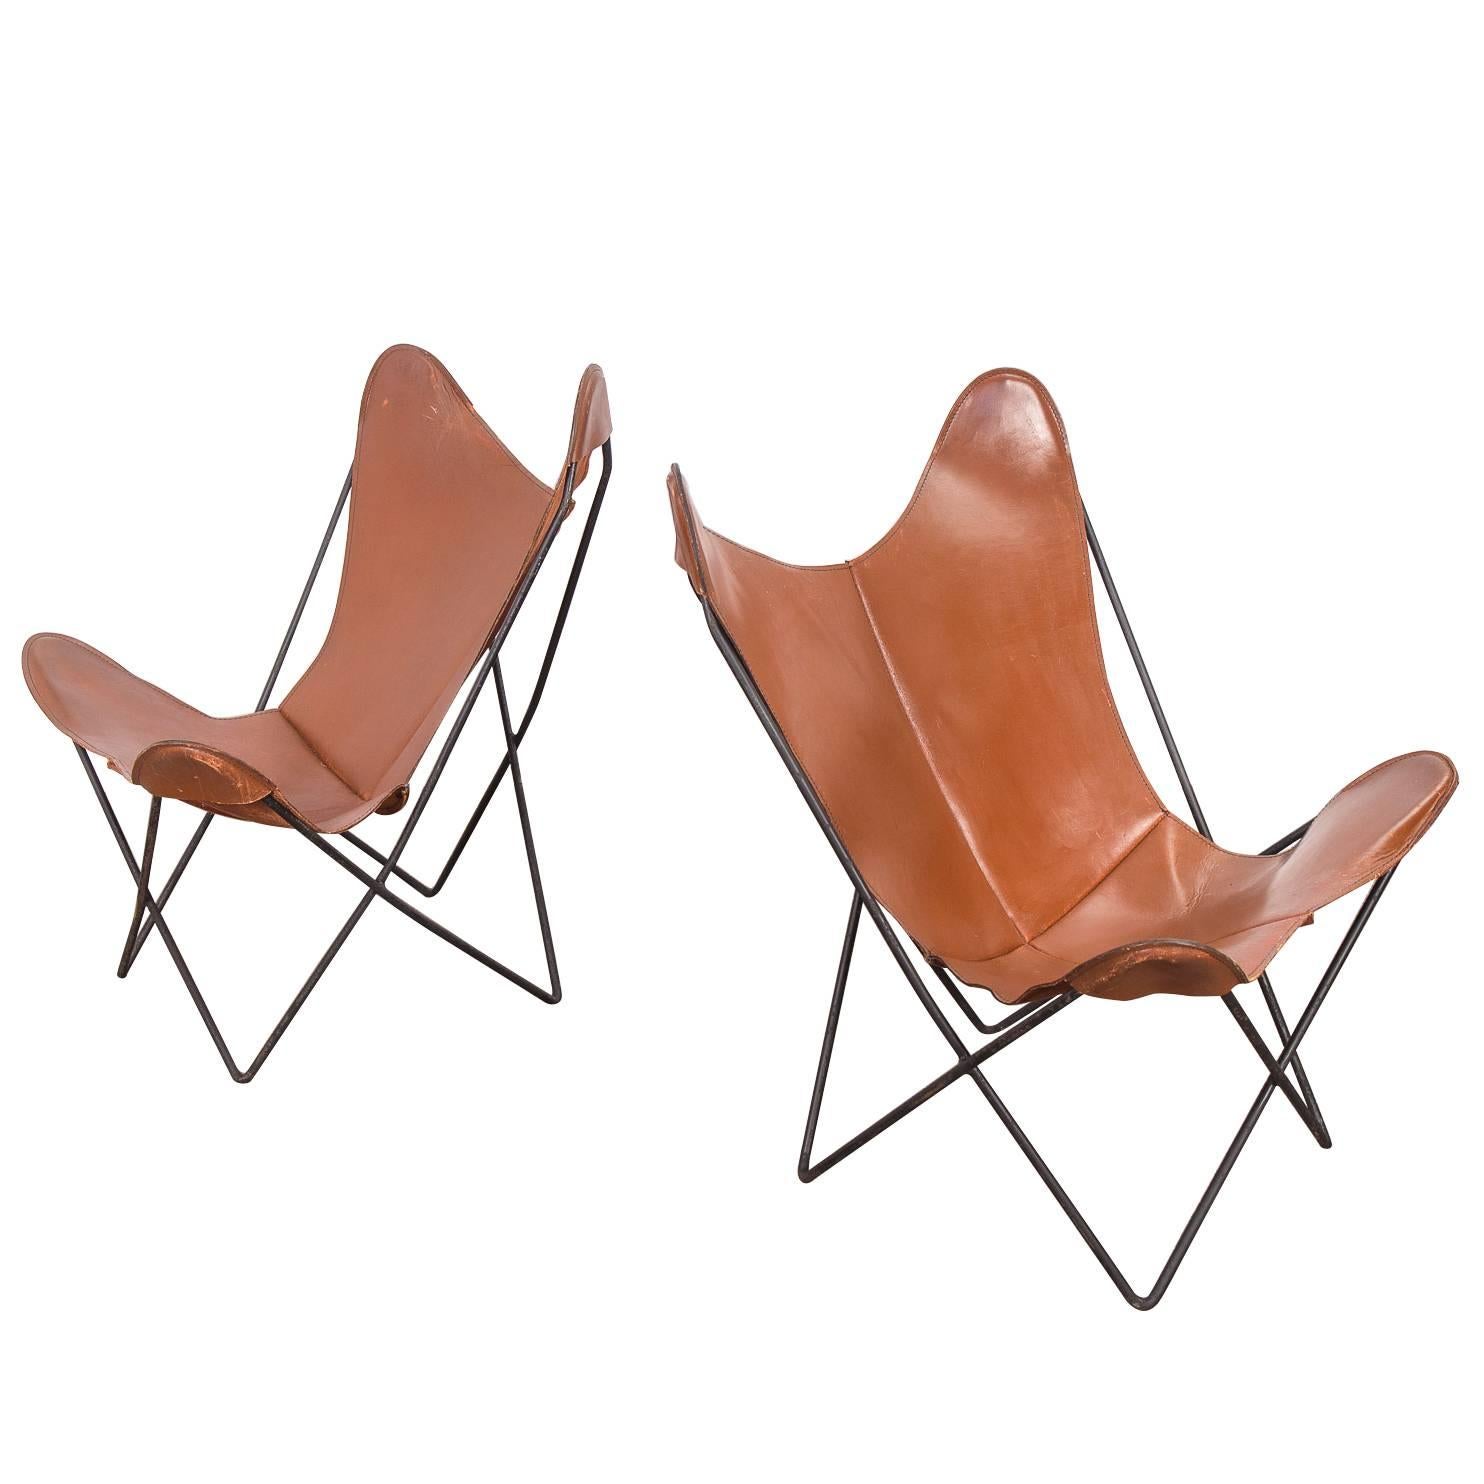 Pair of Tabacco Brown Hardoy Butterfly BKF Chairs for Knoll